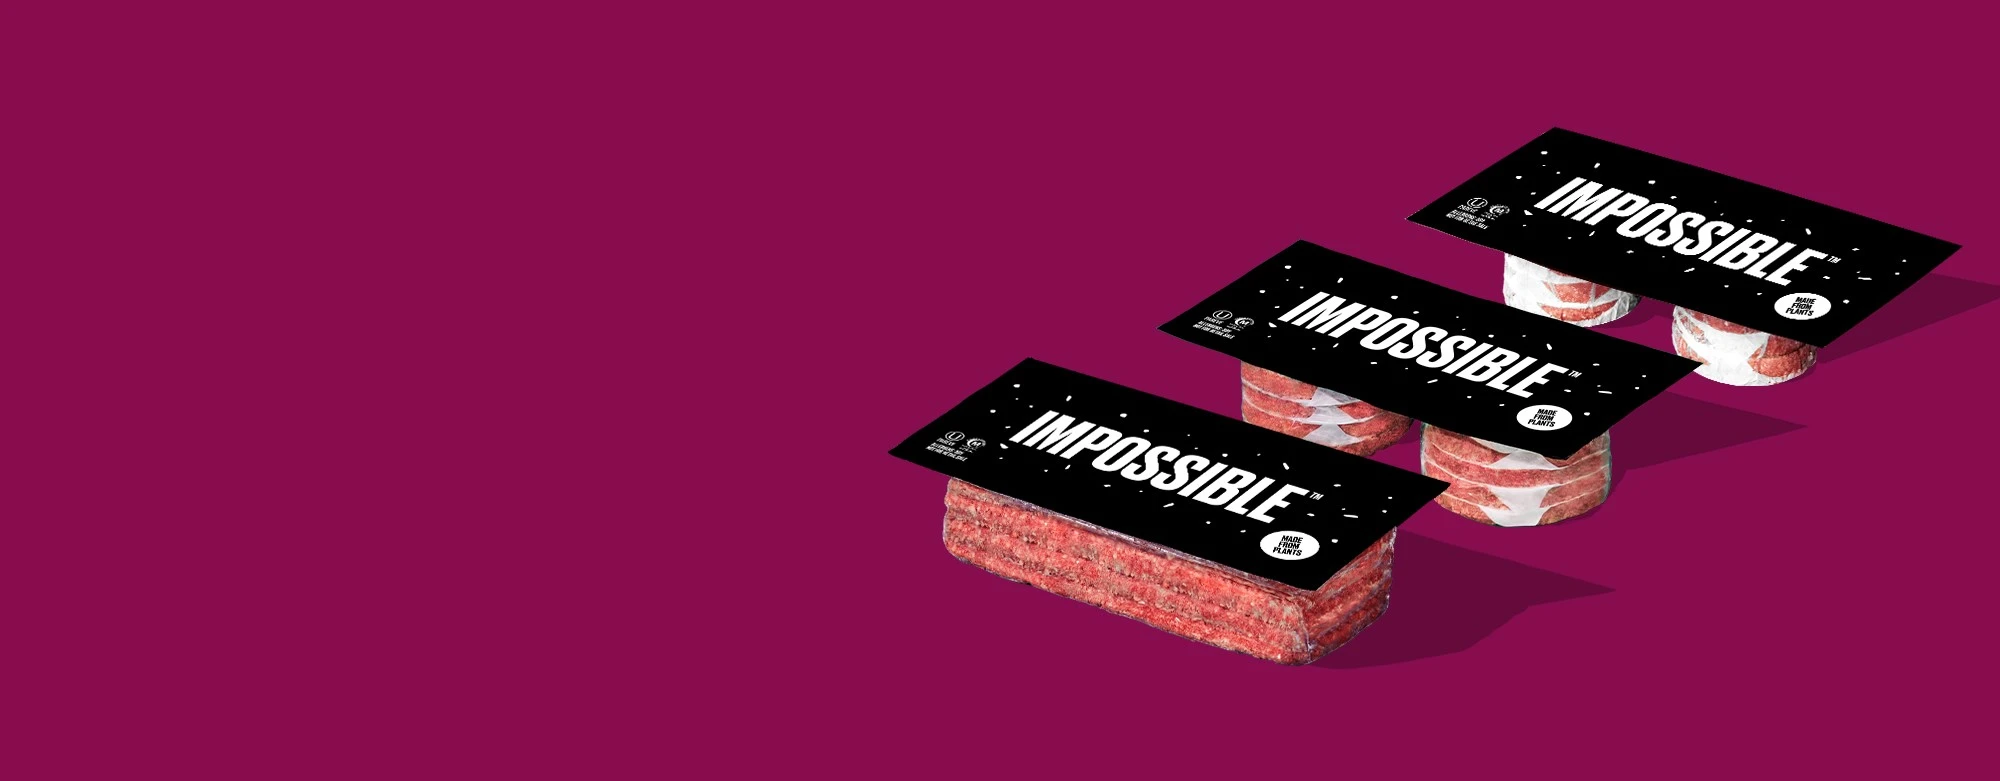 Image of Impossible Burger Patties and Brick Packages for a Restaurant Operator